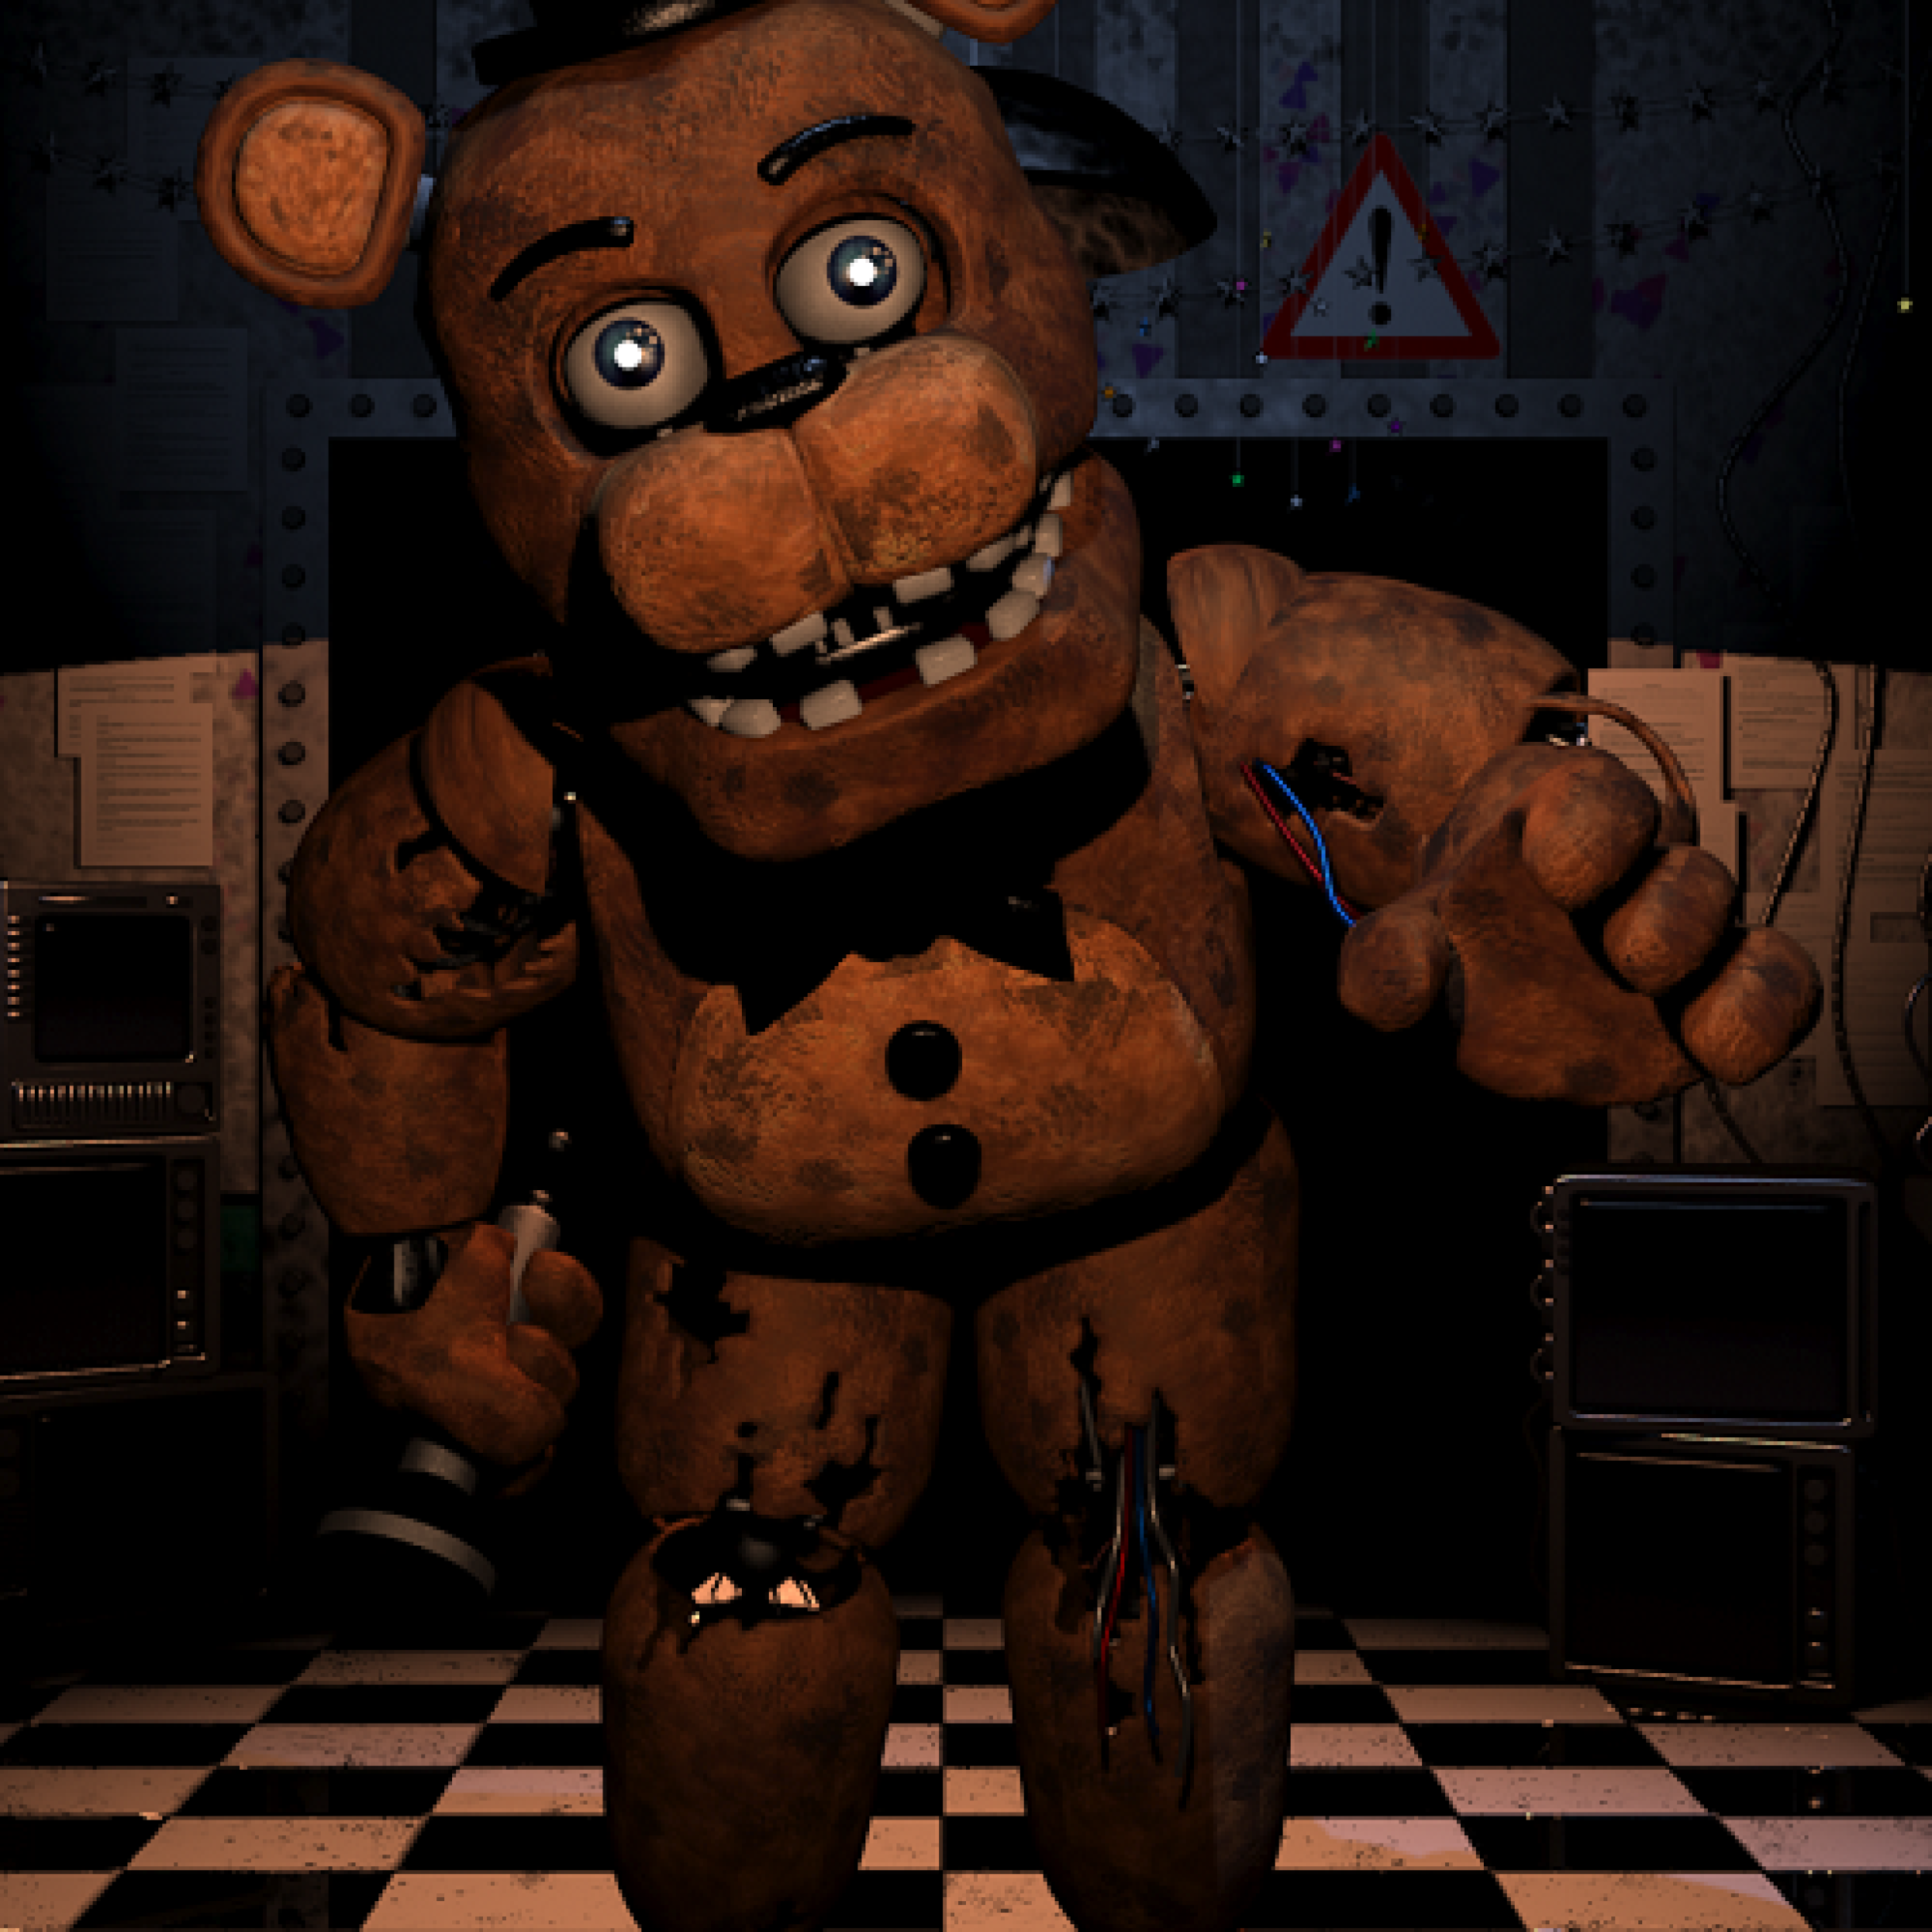 Clickteam on X: We updated Five Nights at Freddy's for iOS and